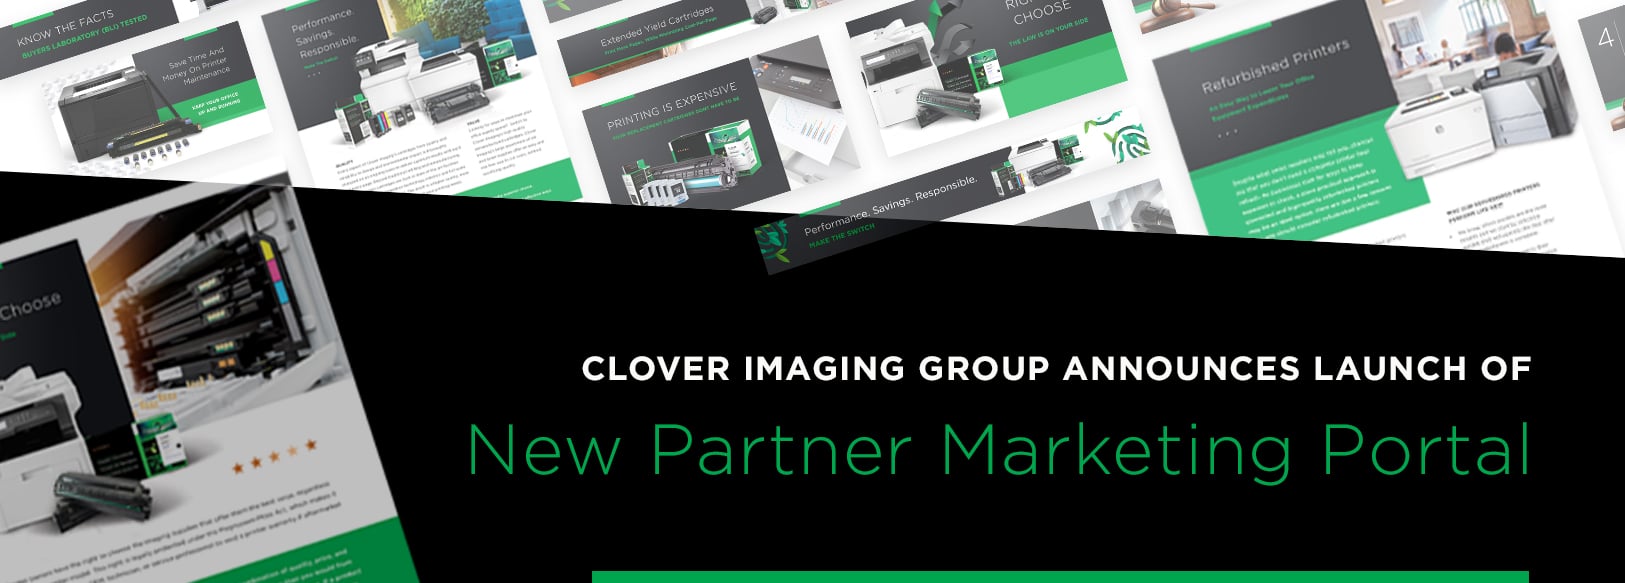 Clover Imaging Group Announces Launch Of New Partner Marketing Portal | Clover Imaging Group USA